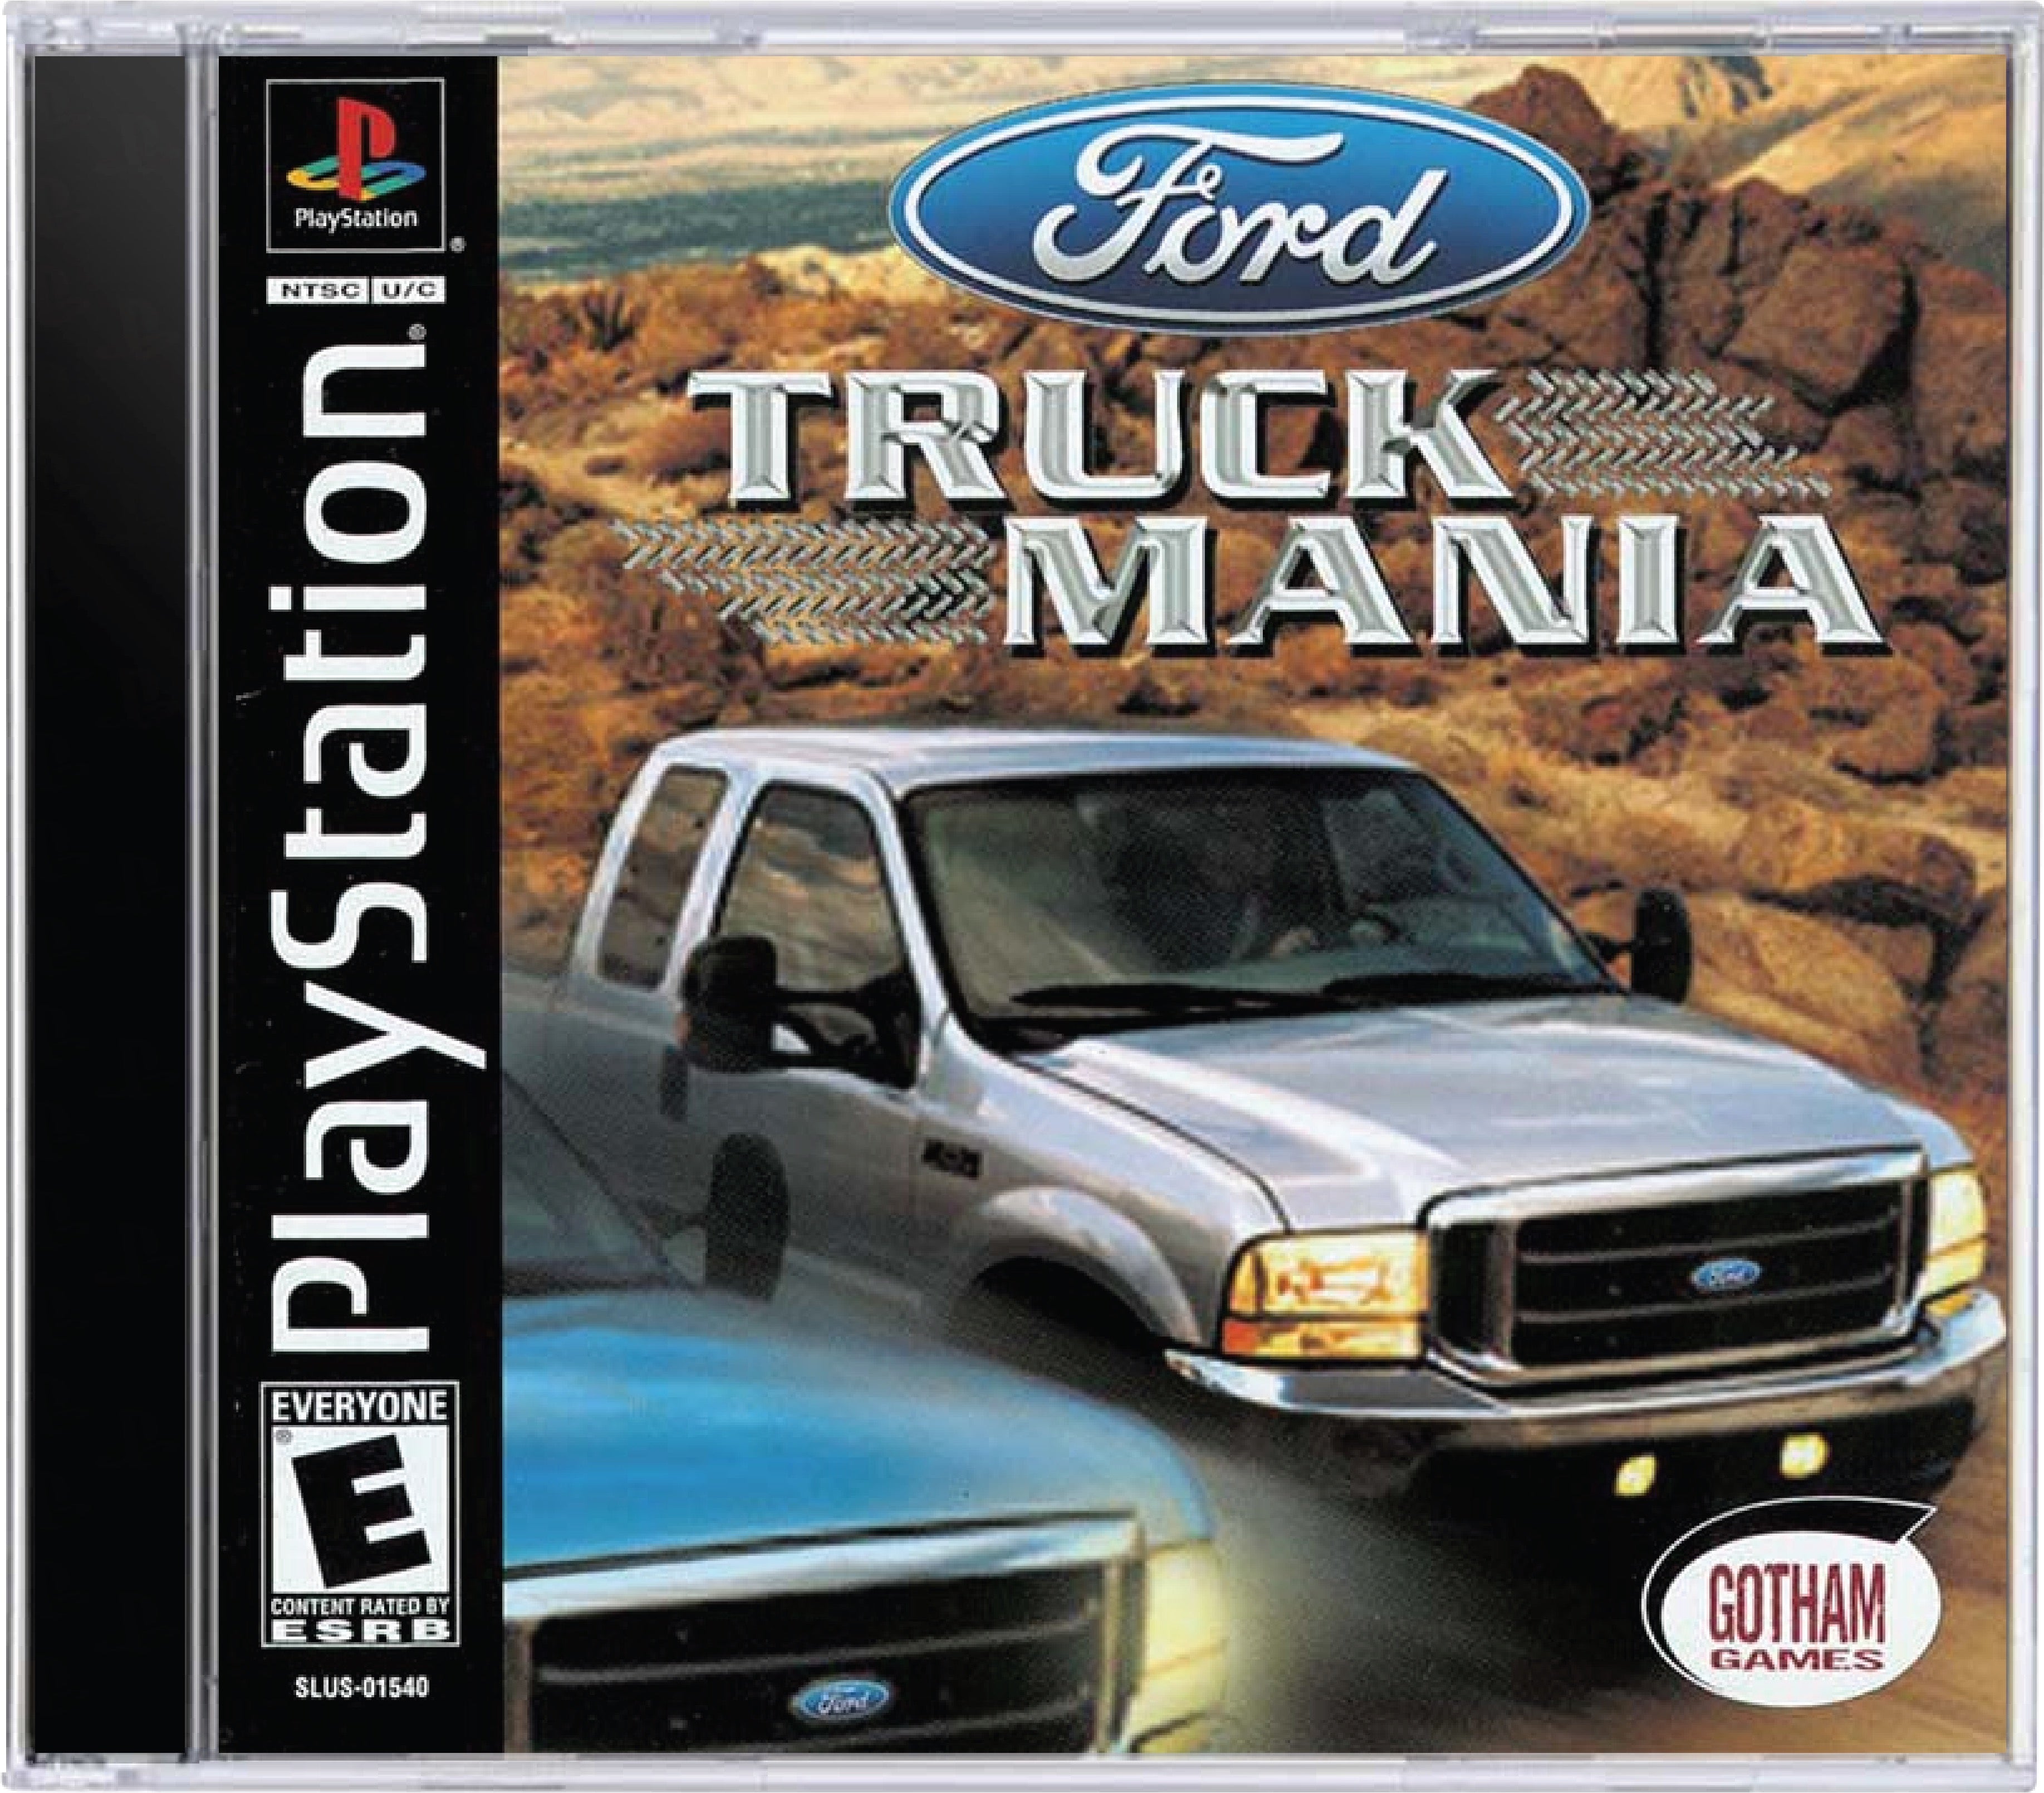 Ford Truck Mania Cover Art and Product Photo